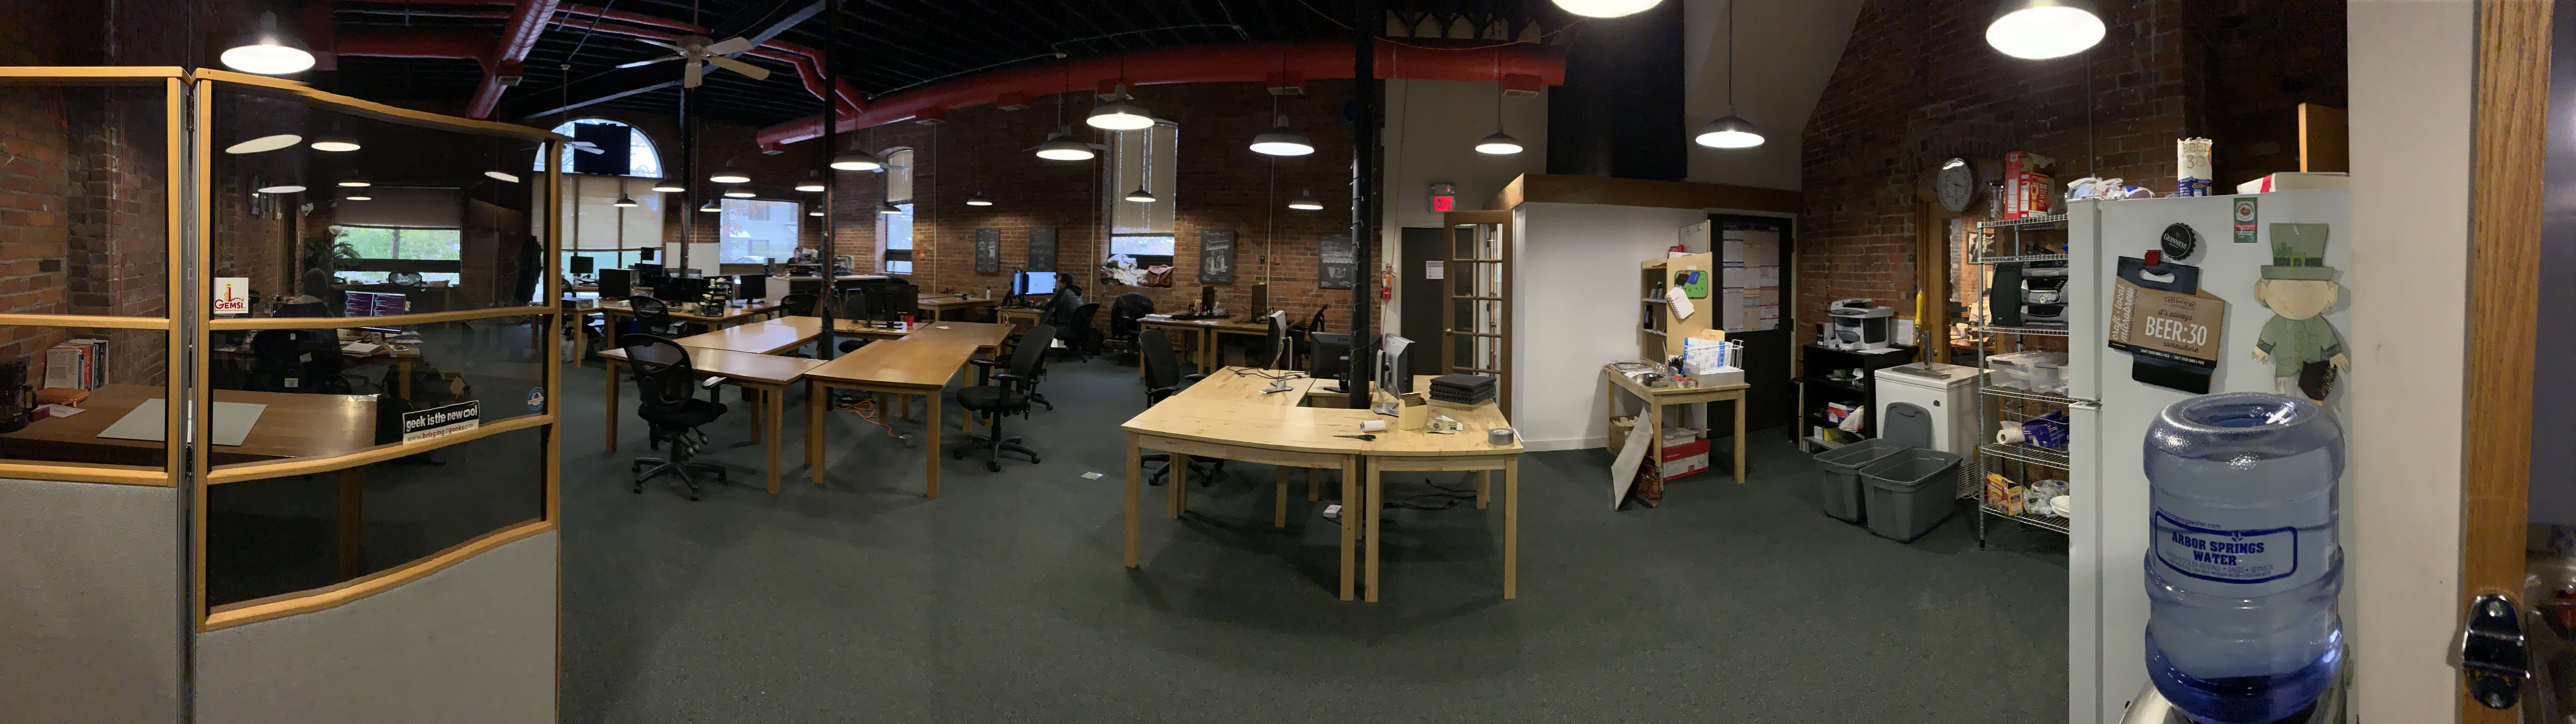 A panorama view of the coworking space